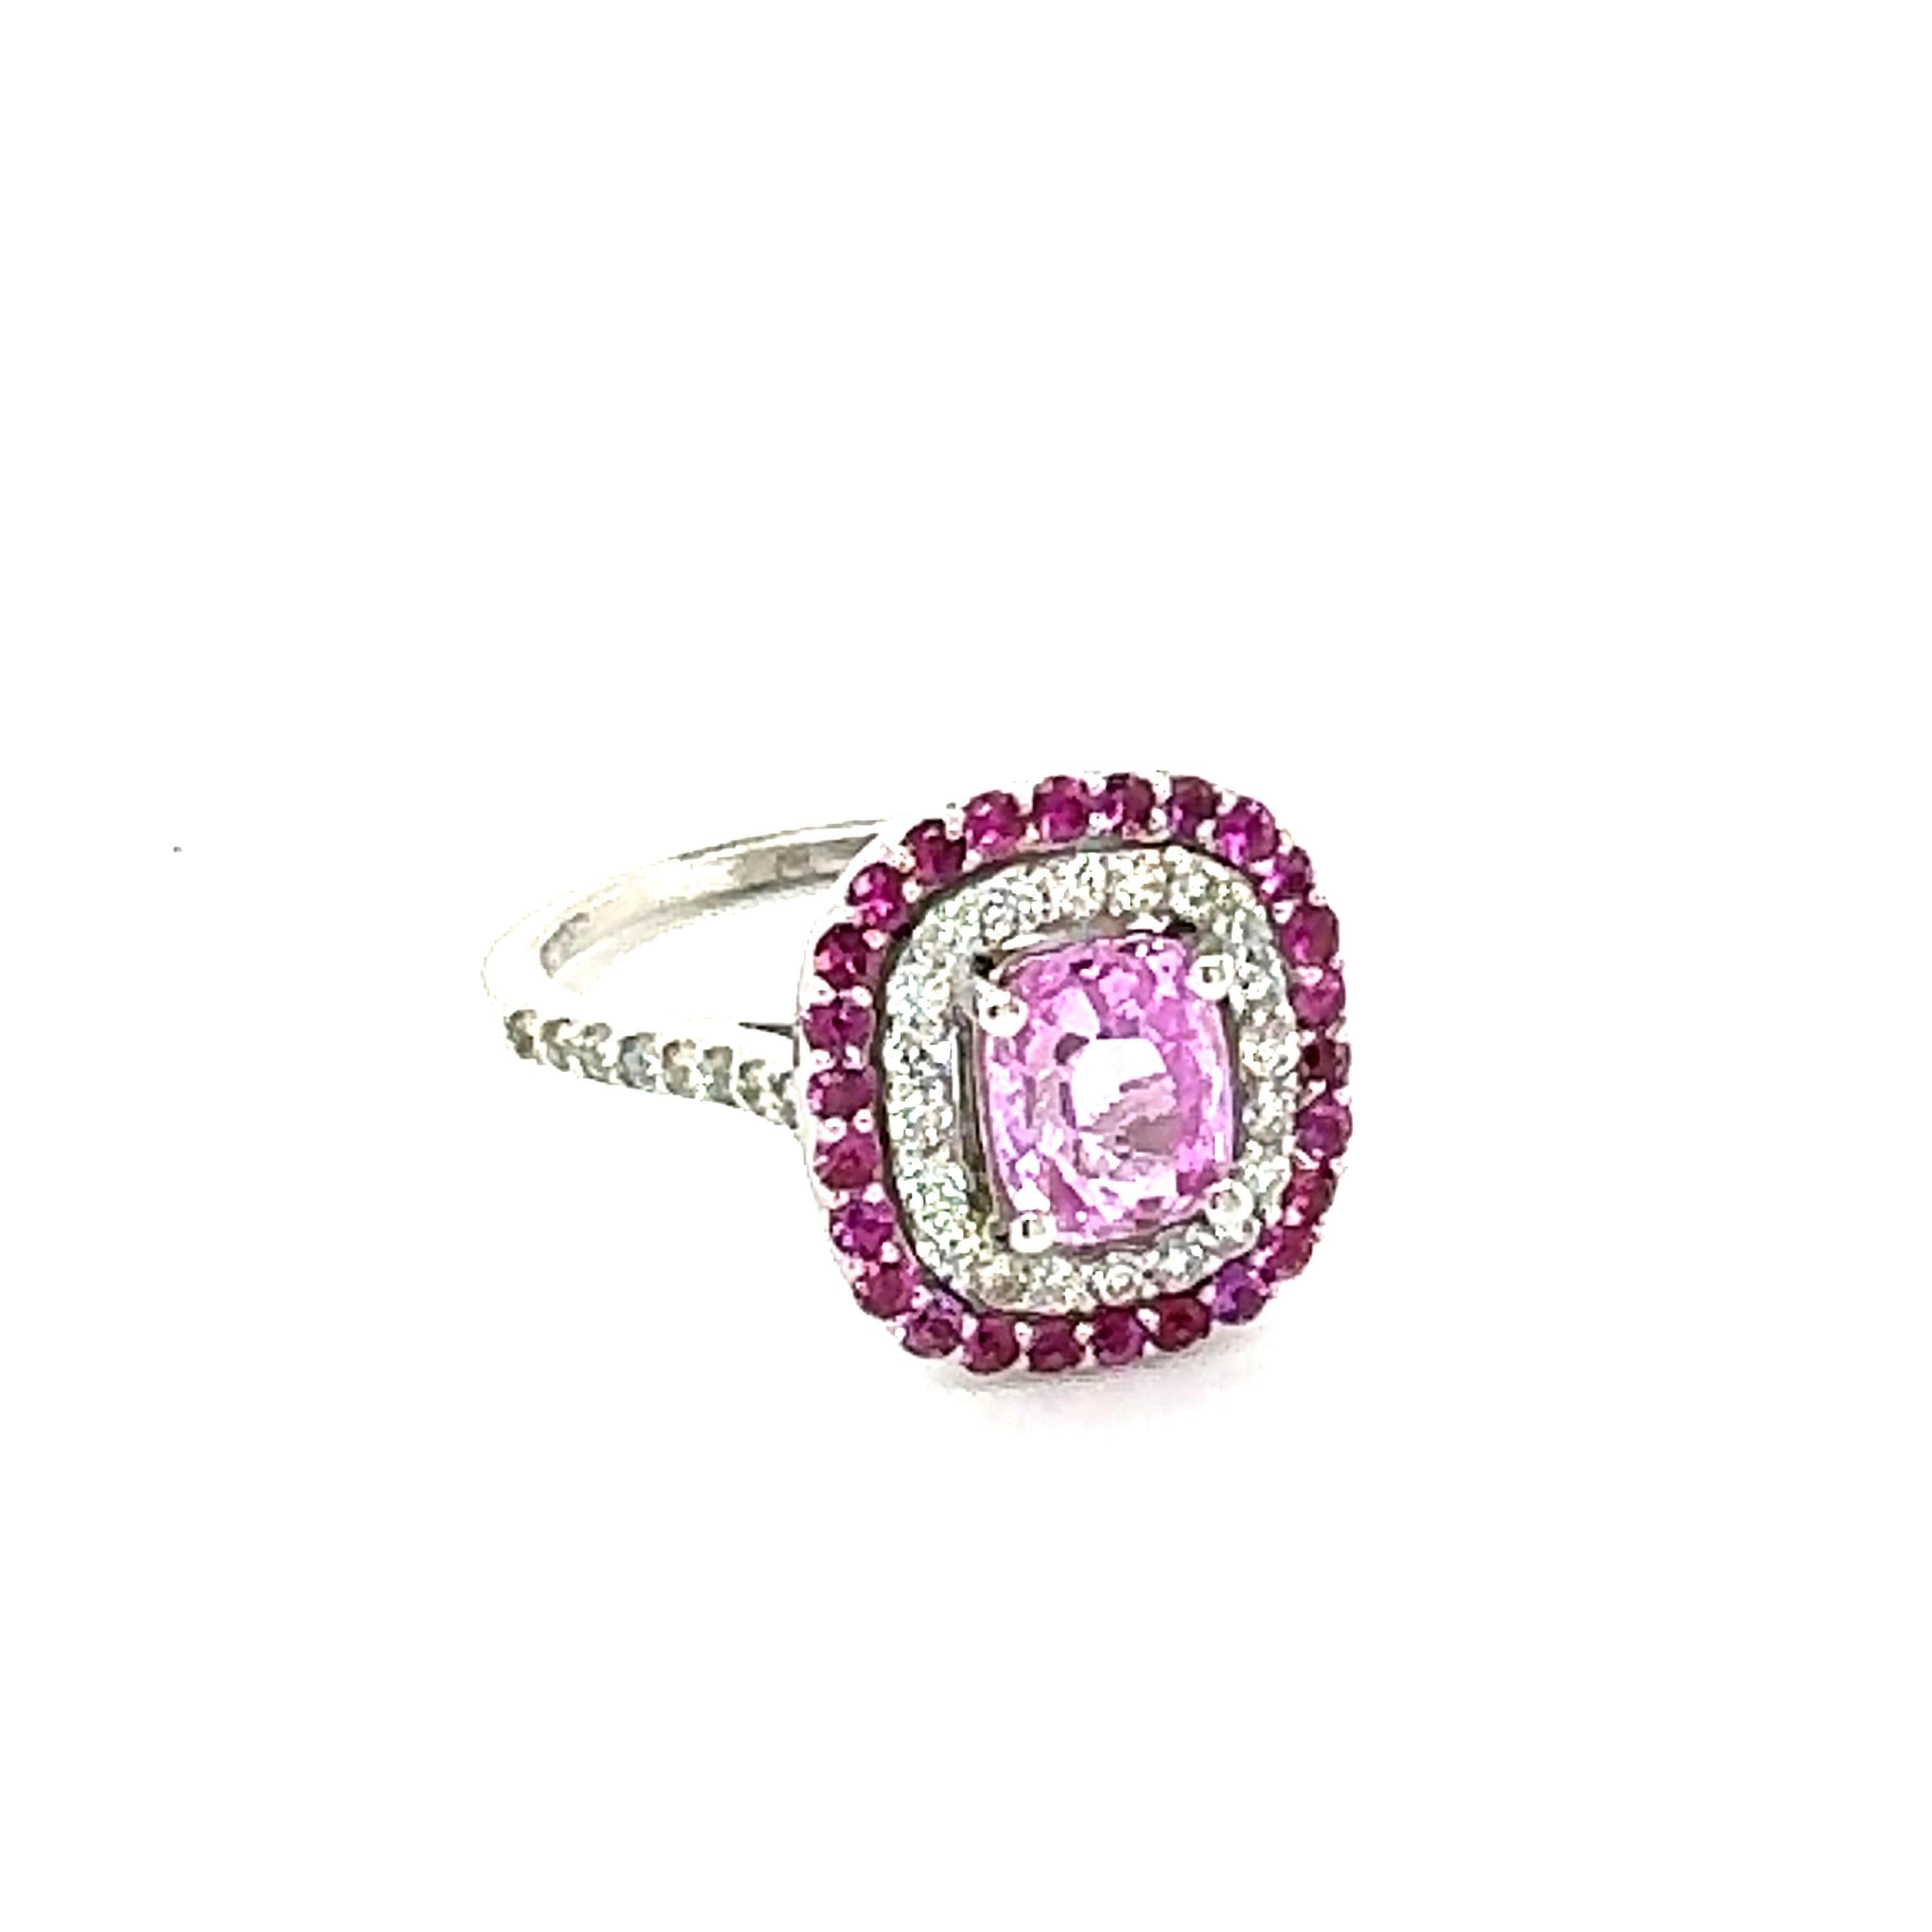 Simply the most elegant and beautiful Pink Sapphire and Diamond Engagement or Wedding Ring!
GIA Certified 2.32 Carat Cushion Cut Pink Sapphire Diamond White Gold Ring

The center Cushion Cut Pink Sapphire is 1.47 Carats and is surrounded by a halo